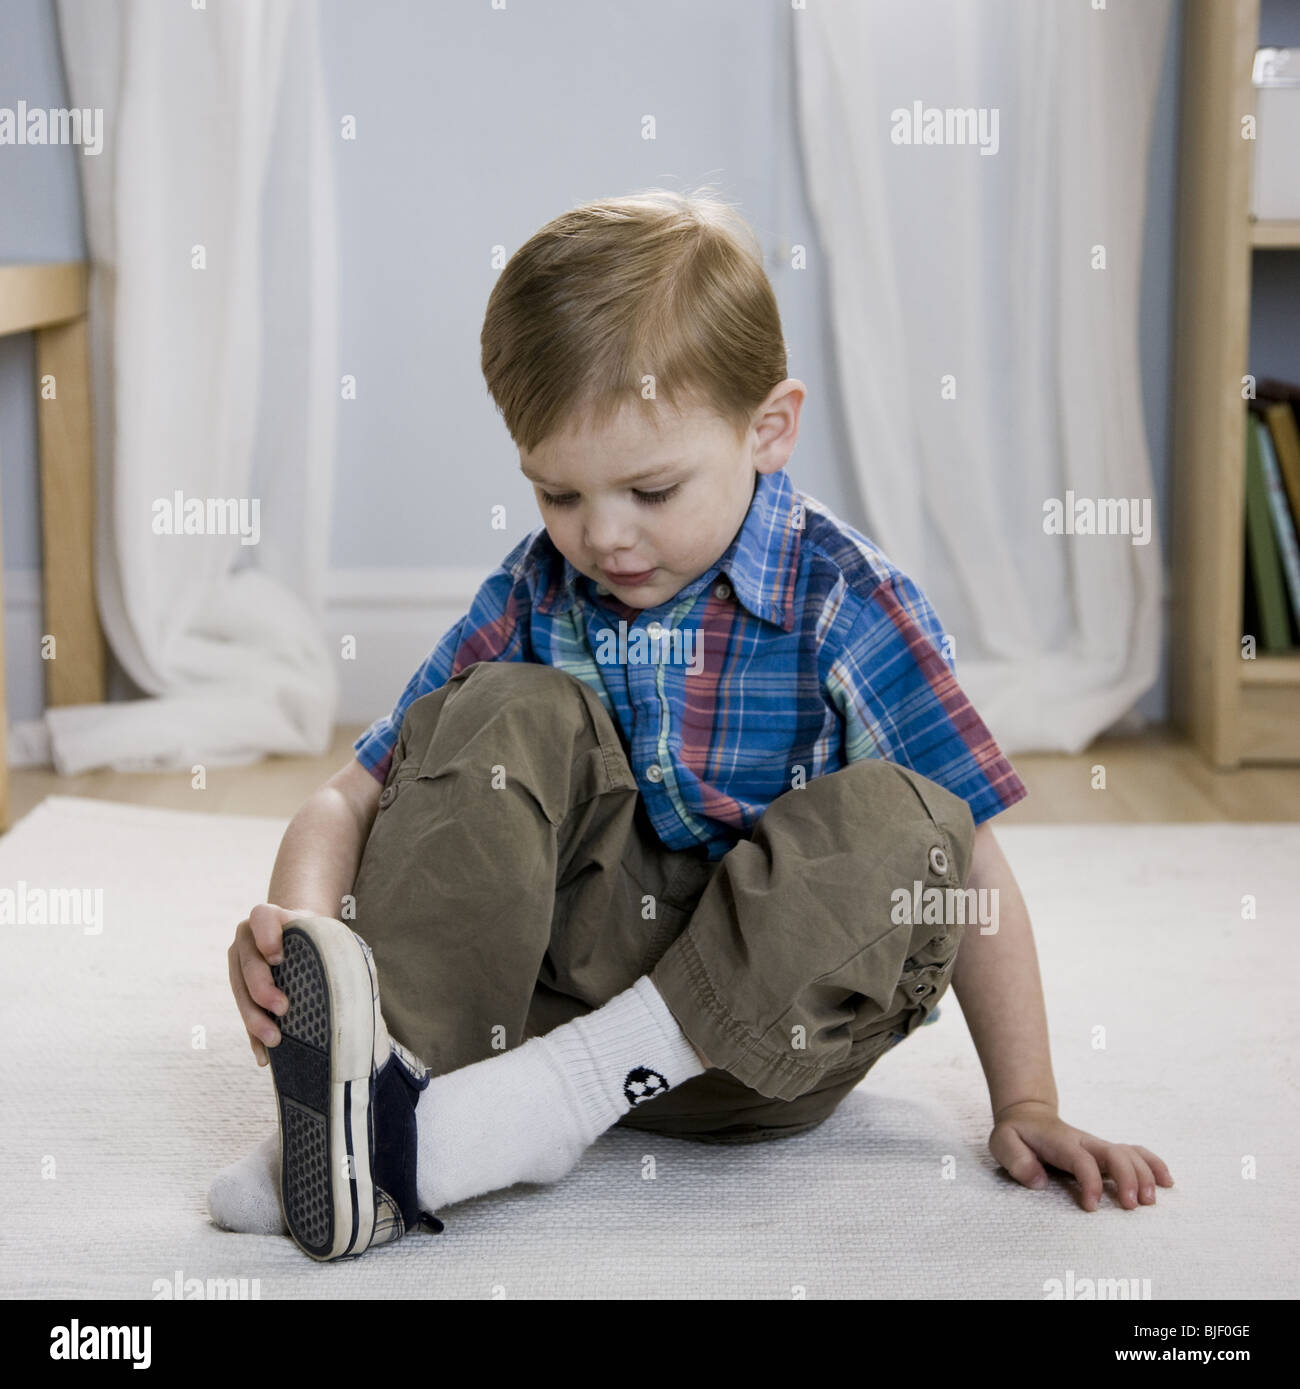 Beautiful Little Boy Takes Off Shoes While Sitting On A 